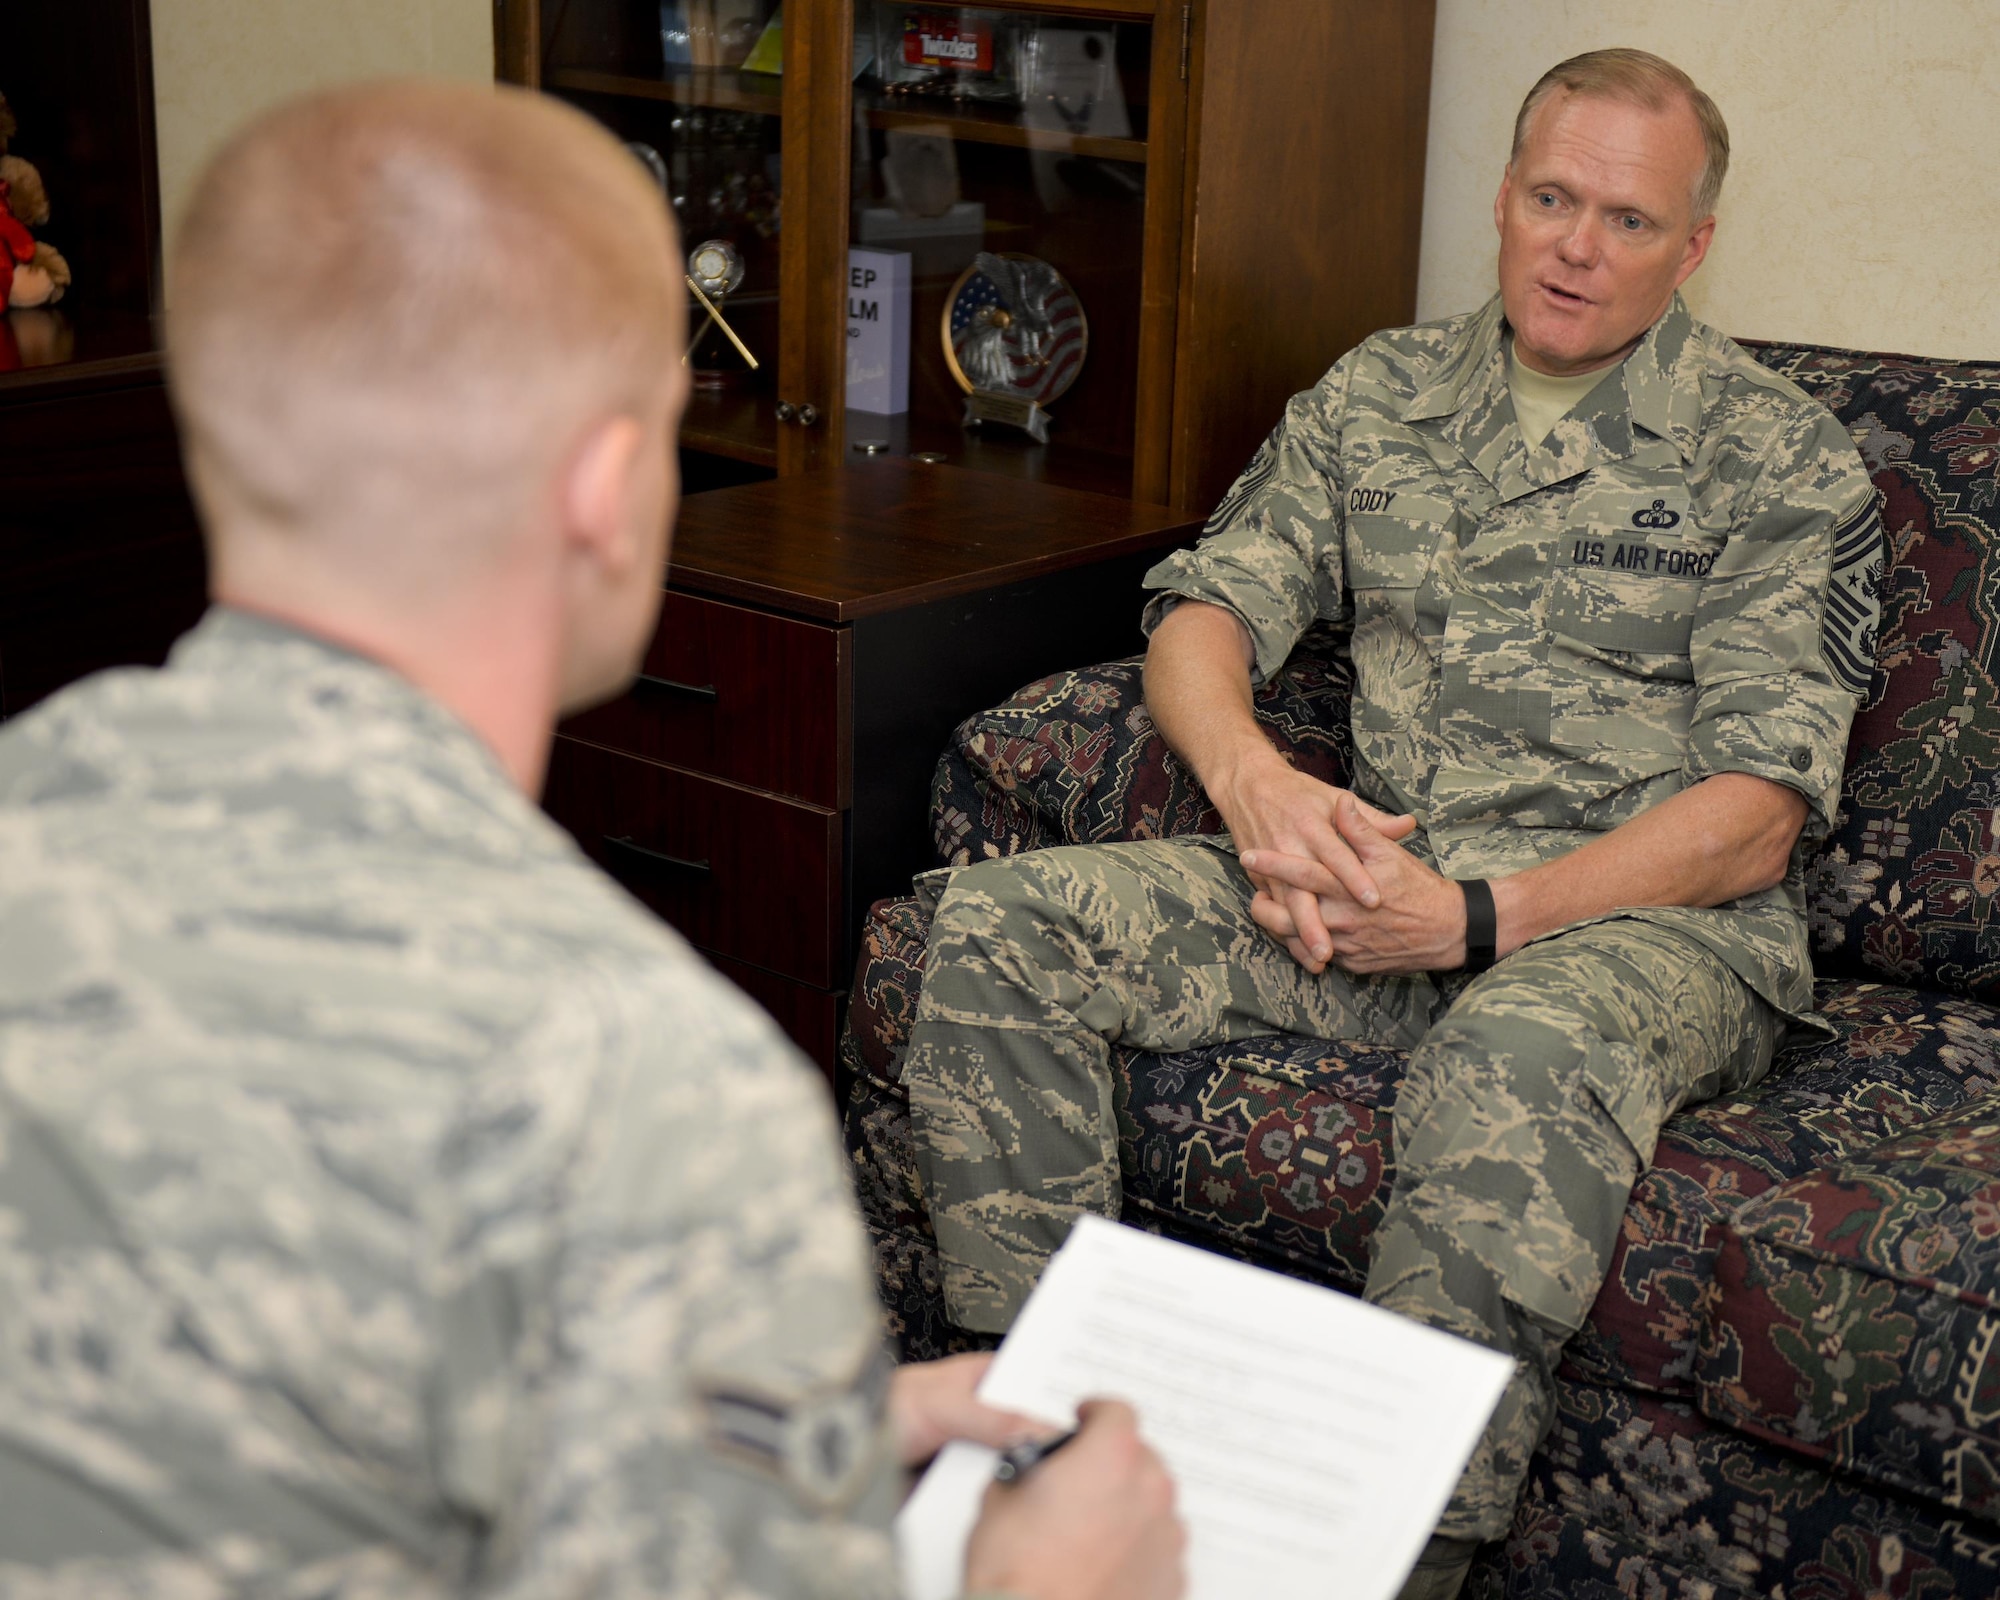 Chief Master Sgt. of the Air Force James A. Cody shares insight about Air Force issues with Airman 1st Class Curt Beach, a 2nd Bomb Wing Public Affairs photojournalist, at Barksdale Air Force Base, La., Oct. 22, 2015. Cody represents the highest enlisted level of leadership, and as such, provides direction for the enlisted force and represents their interests, as appropriate, to the American public and to those in all levels of government. (U.S. Air Force photo/Airman 1st Class Mozer O. Da Cunha) 